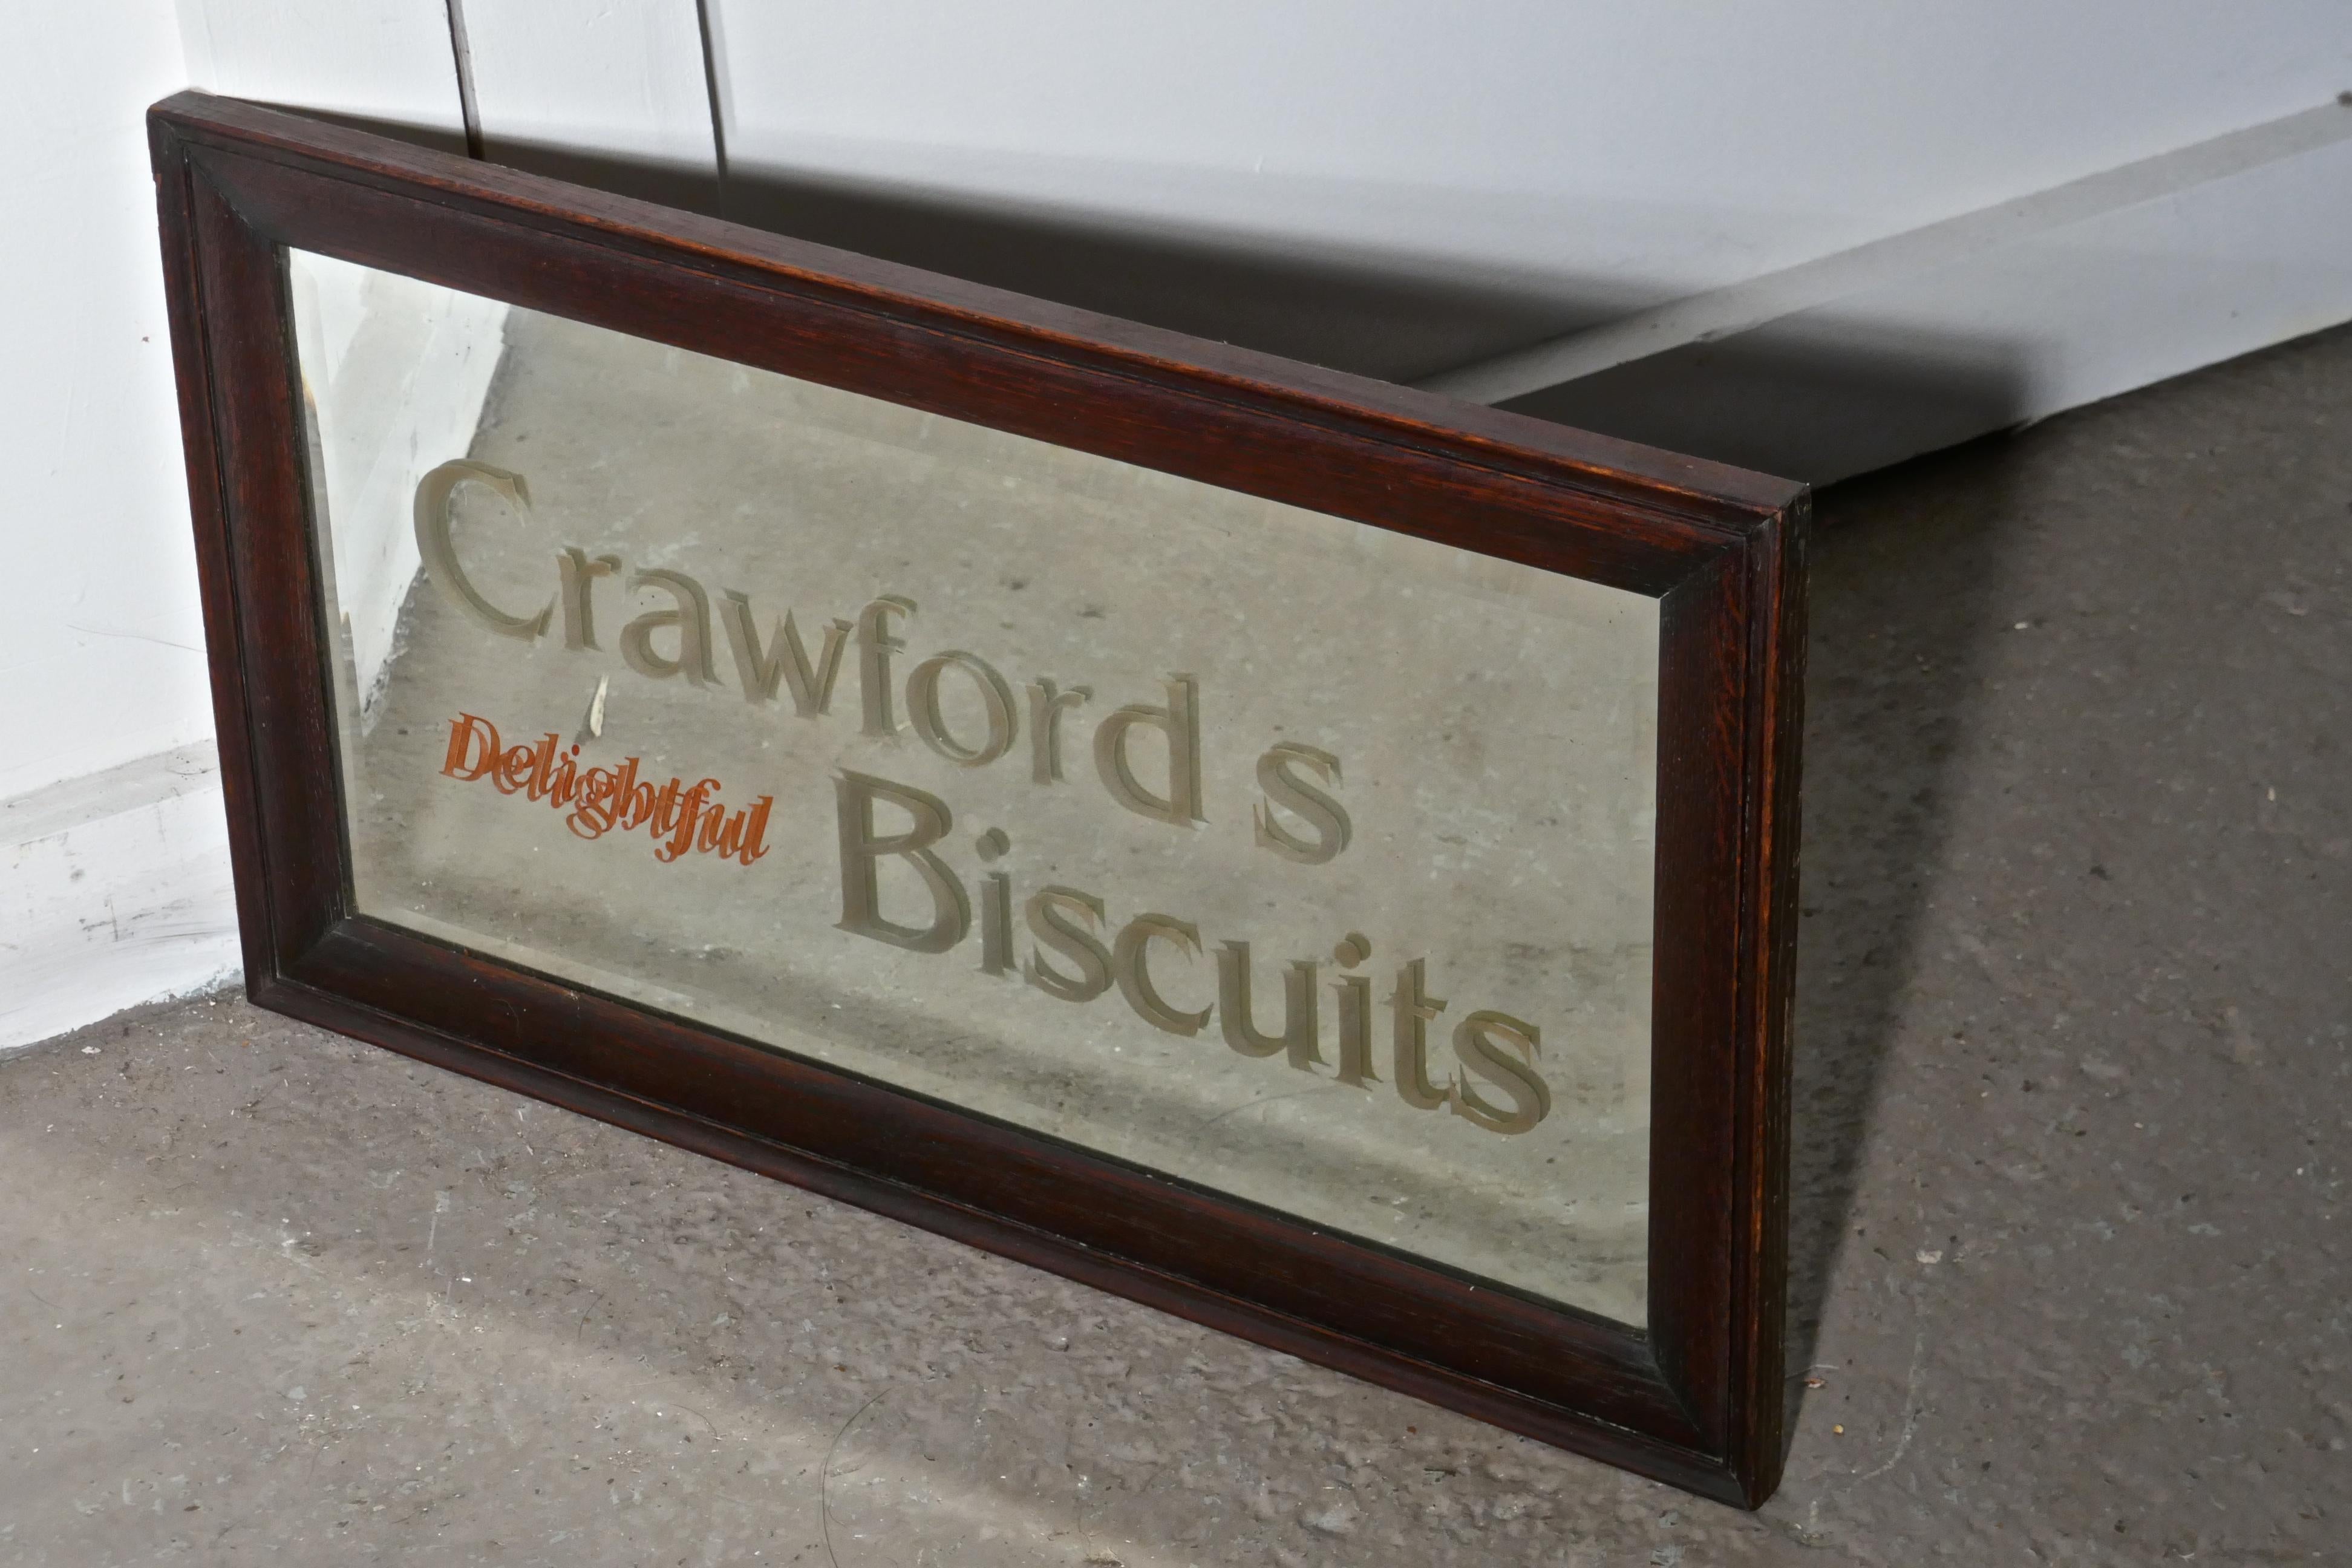 “Crawford’s Delightful Biscuits” baker/cafe advertising mirror

This is a good piece the bevelled mirror is set in a 2” wide oak frame, in the centre in large letters etched into the glass it advertises Crawford’s delightful biscuits

This will